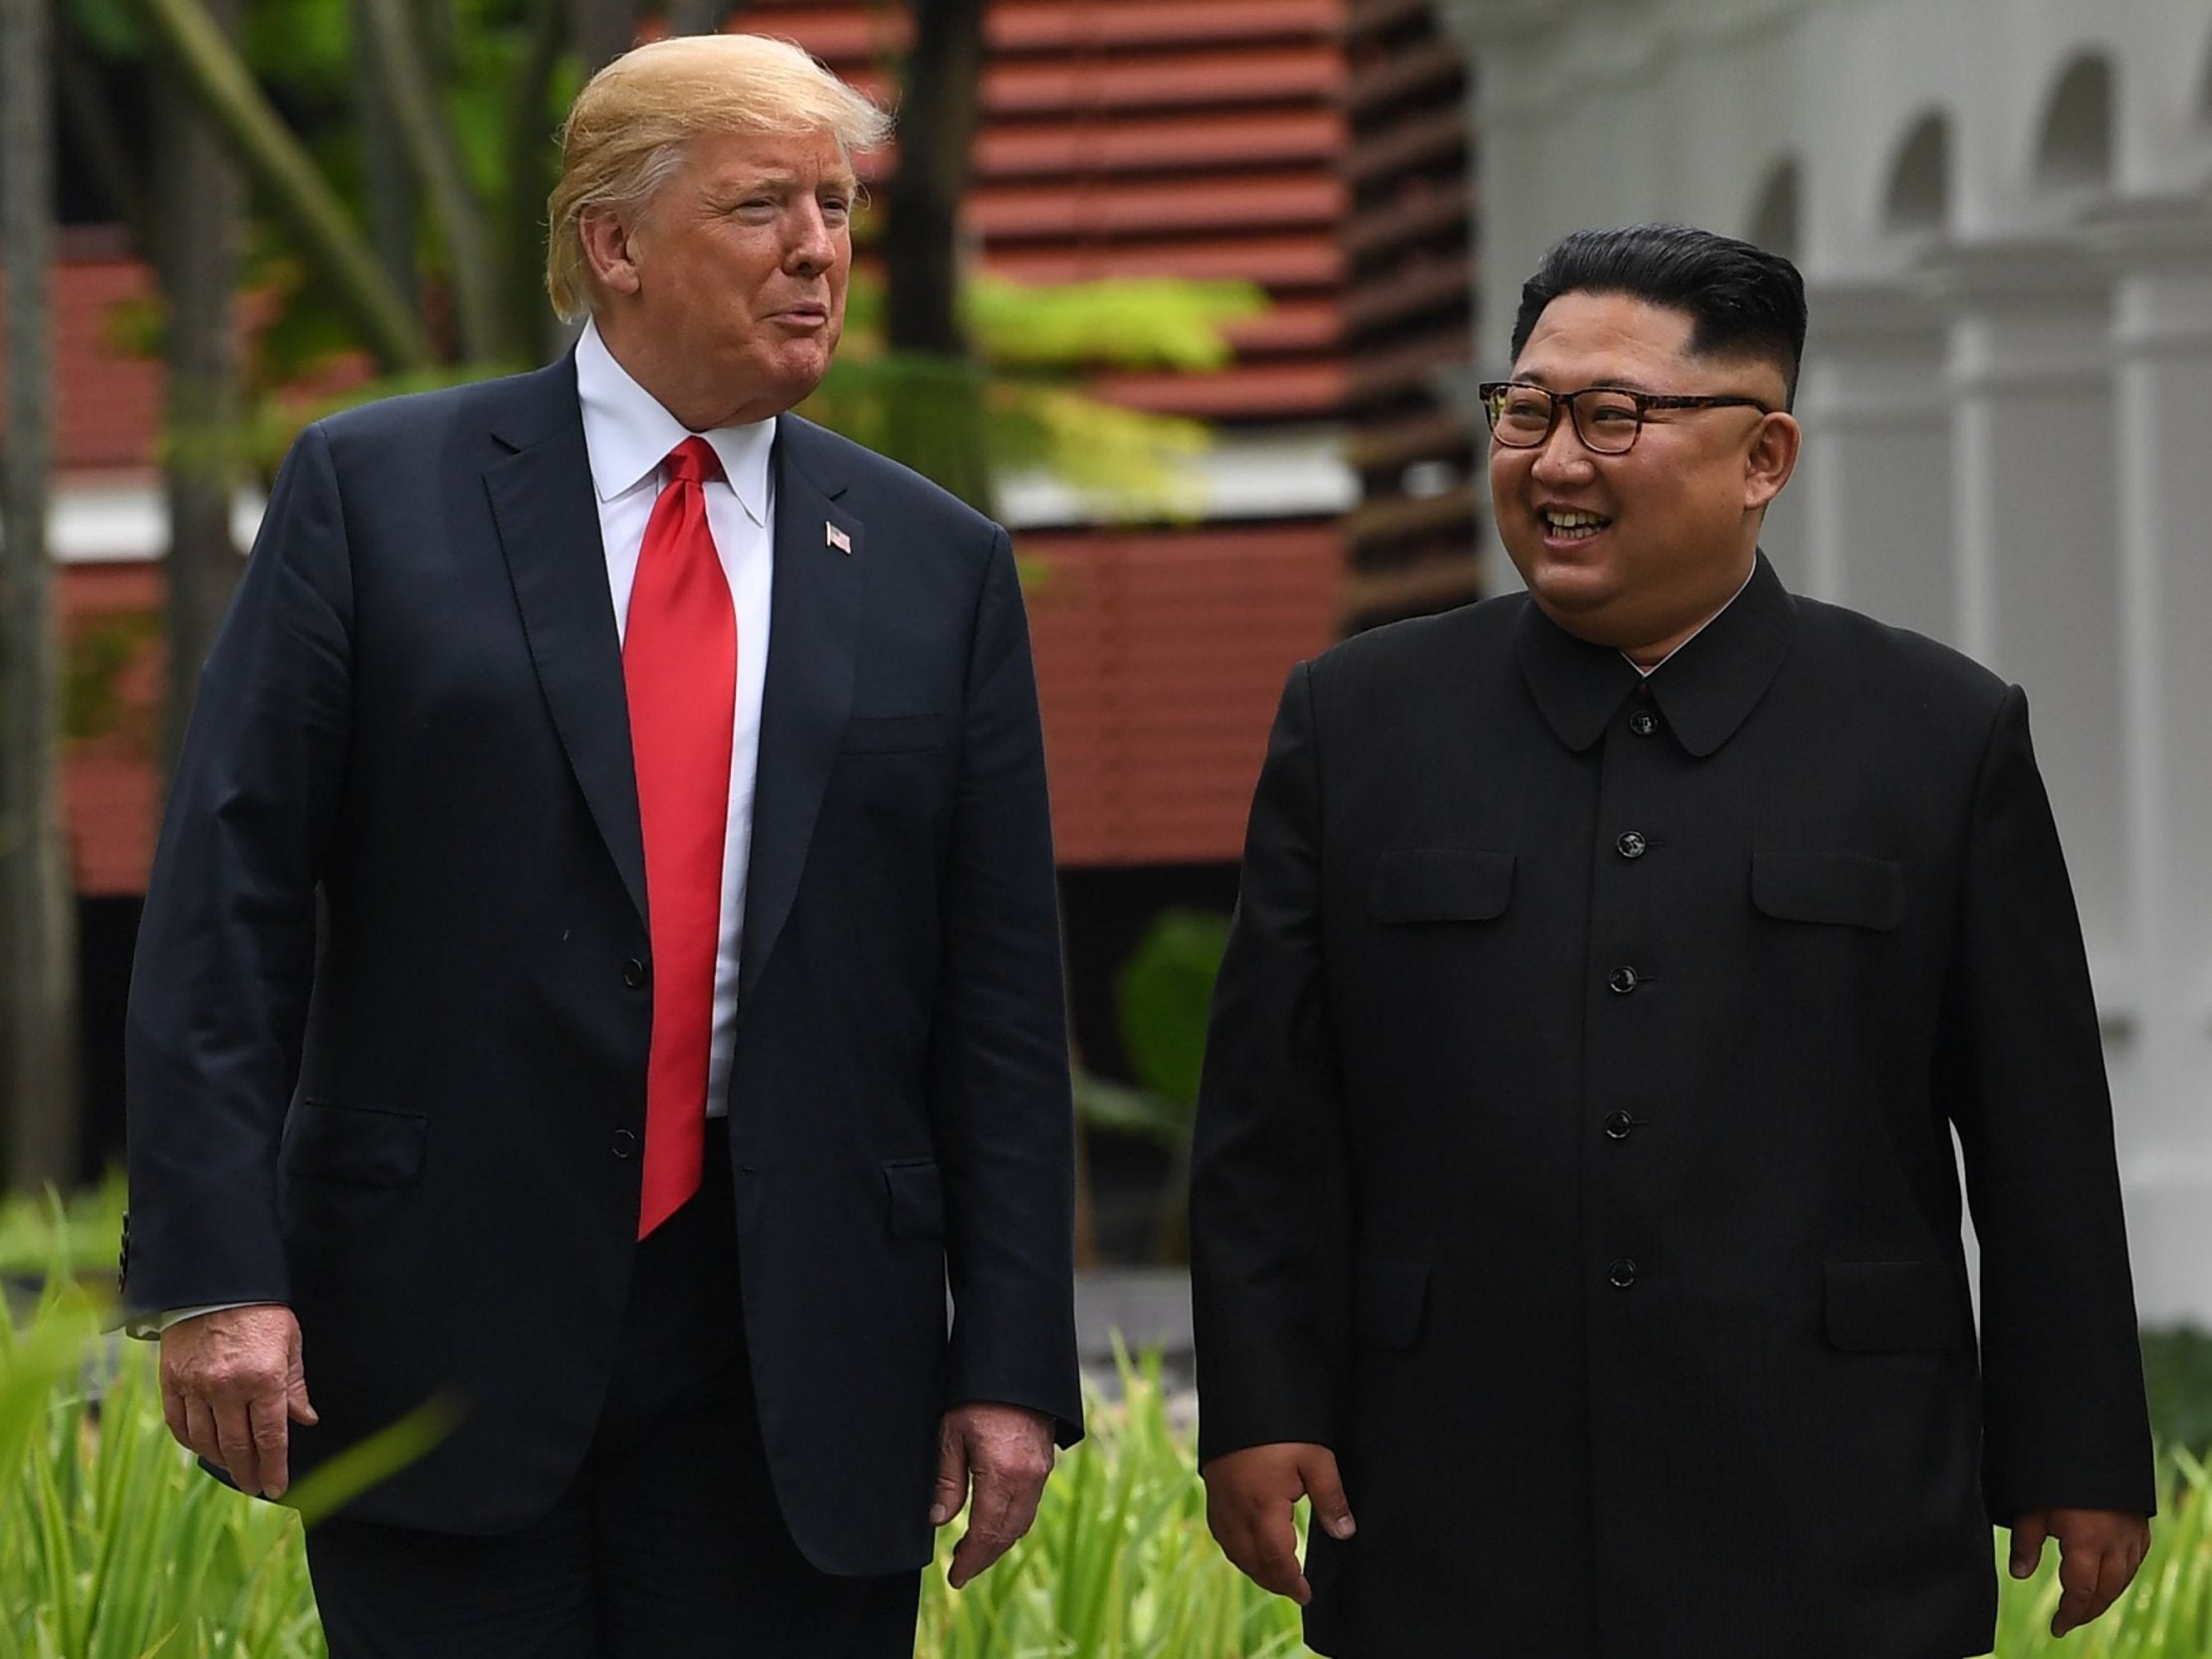 Donald Trump walks with Kim Jong-un during the historic summit in June 2018